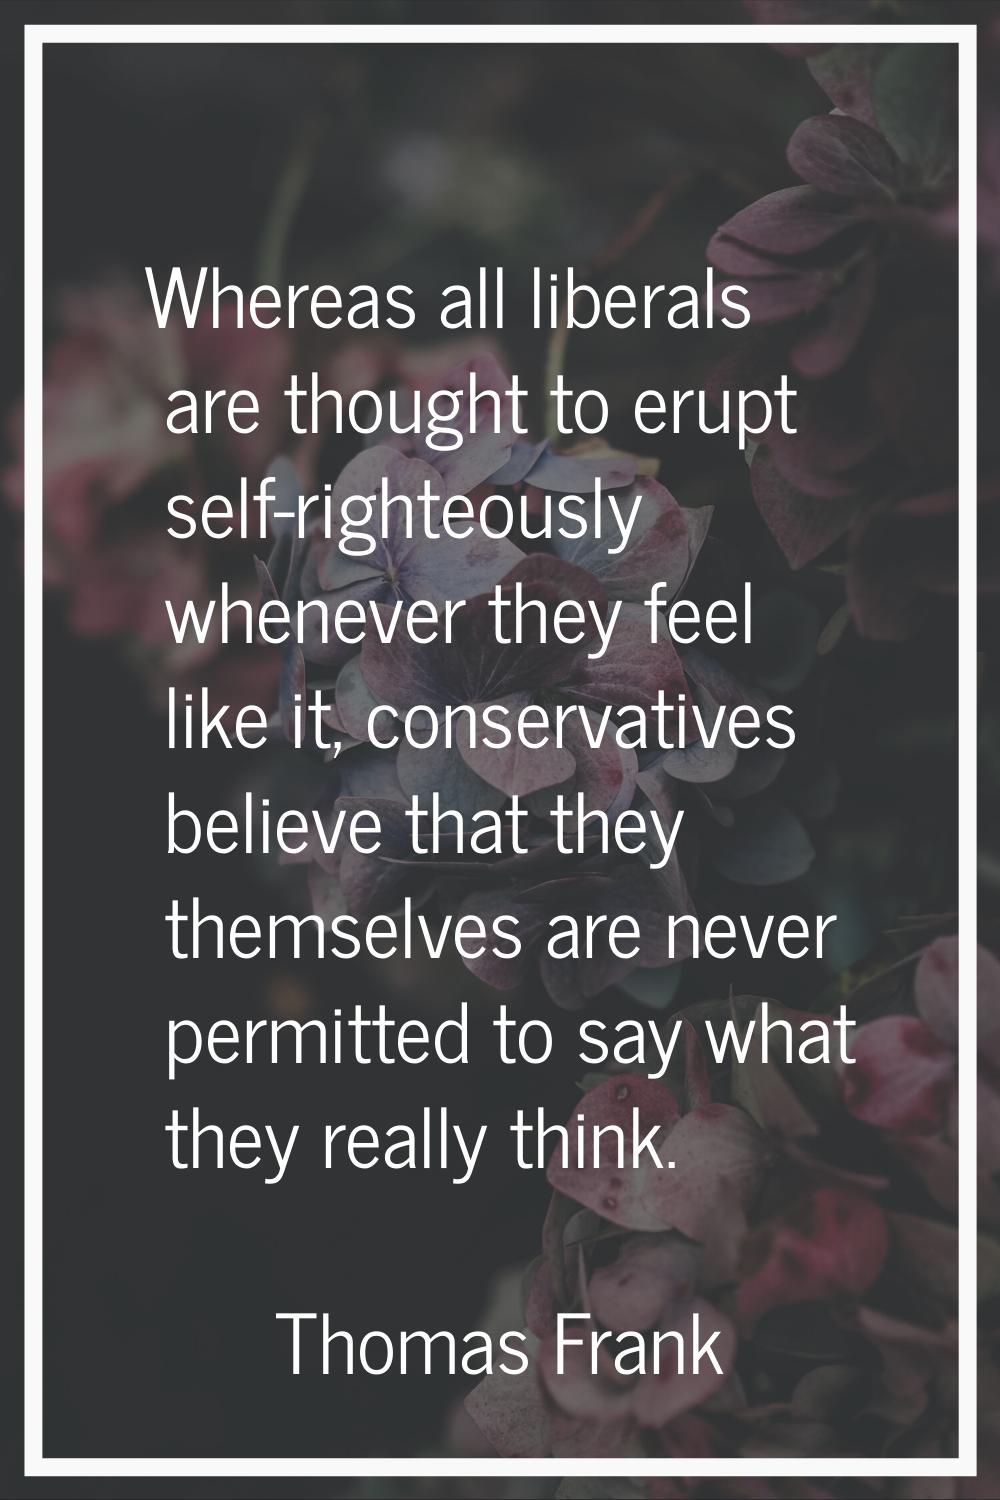 Whereas all liberals are thought to erupt self-righteously whenever they feel like it, conservative